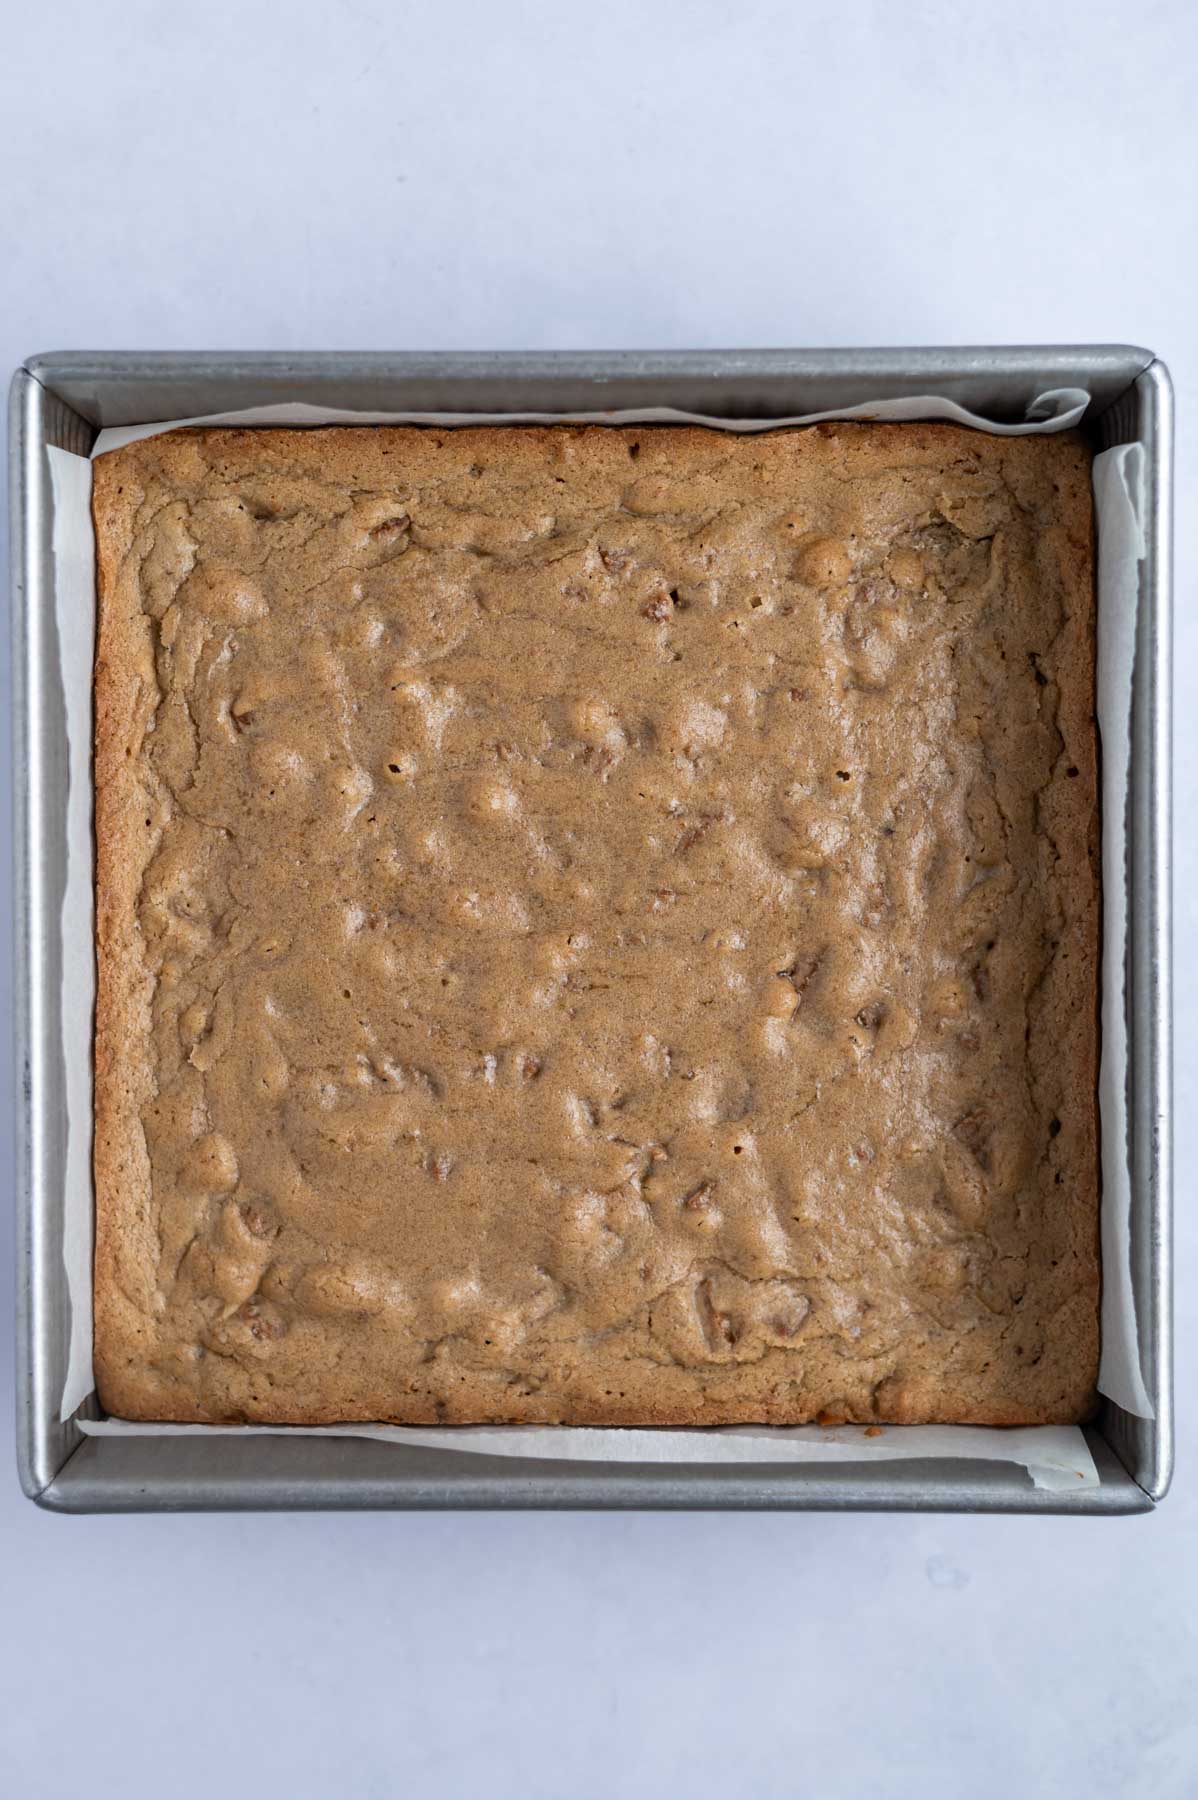 baked bars in a parchment lined baking pan